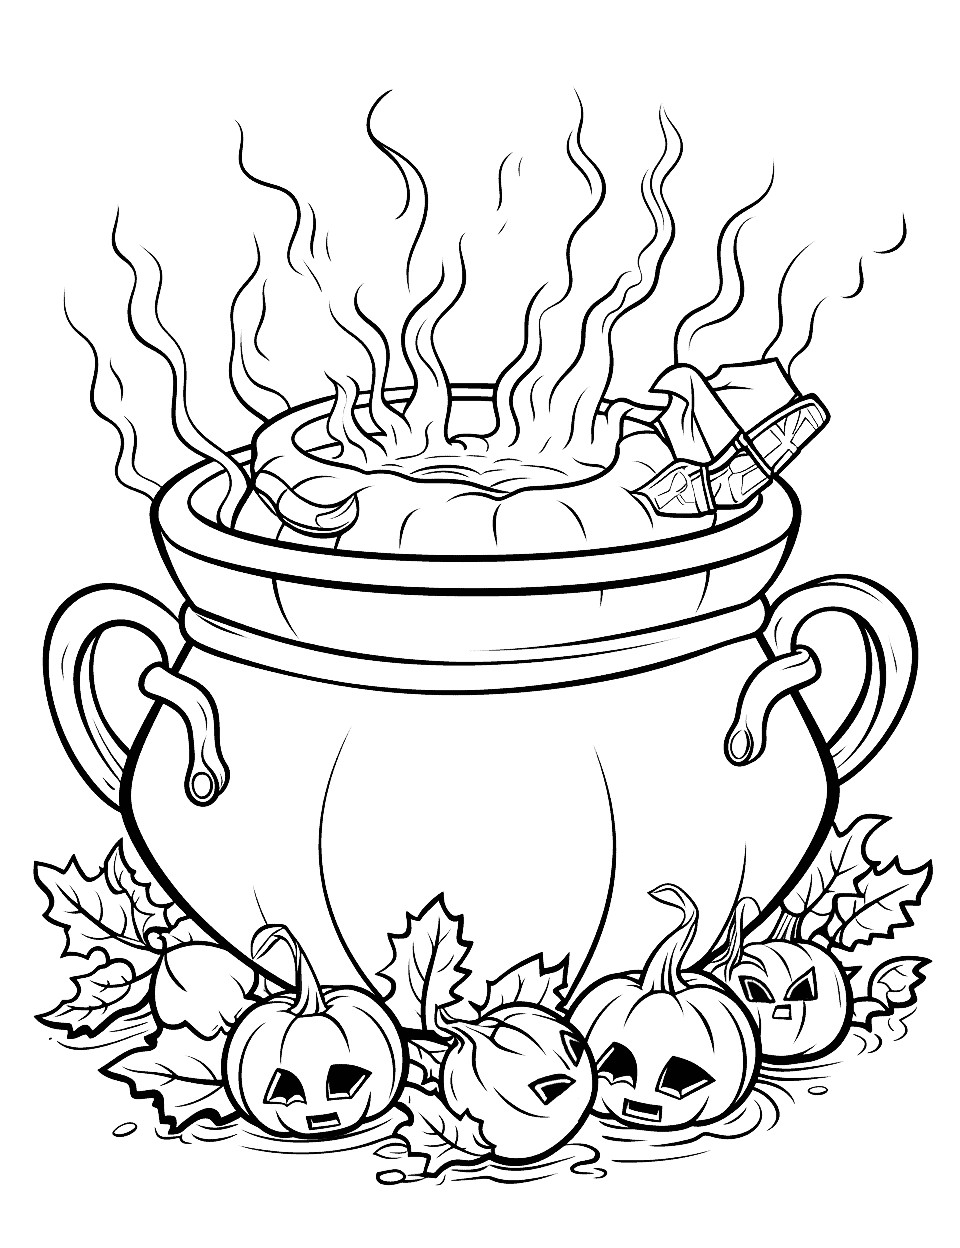 Witch's Brew Halloween Coloring Page - A cauldron bubbling over with a mysterious potion in a room filled with witchy details.